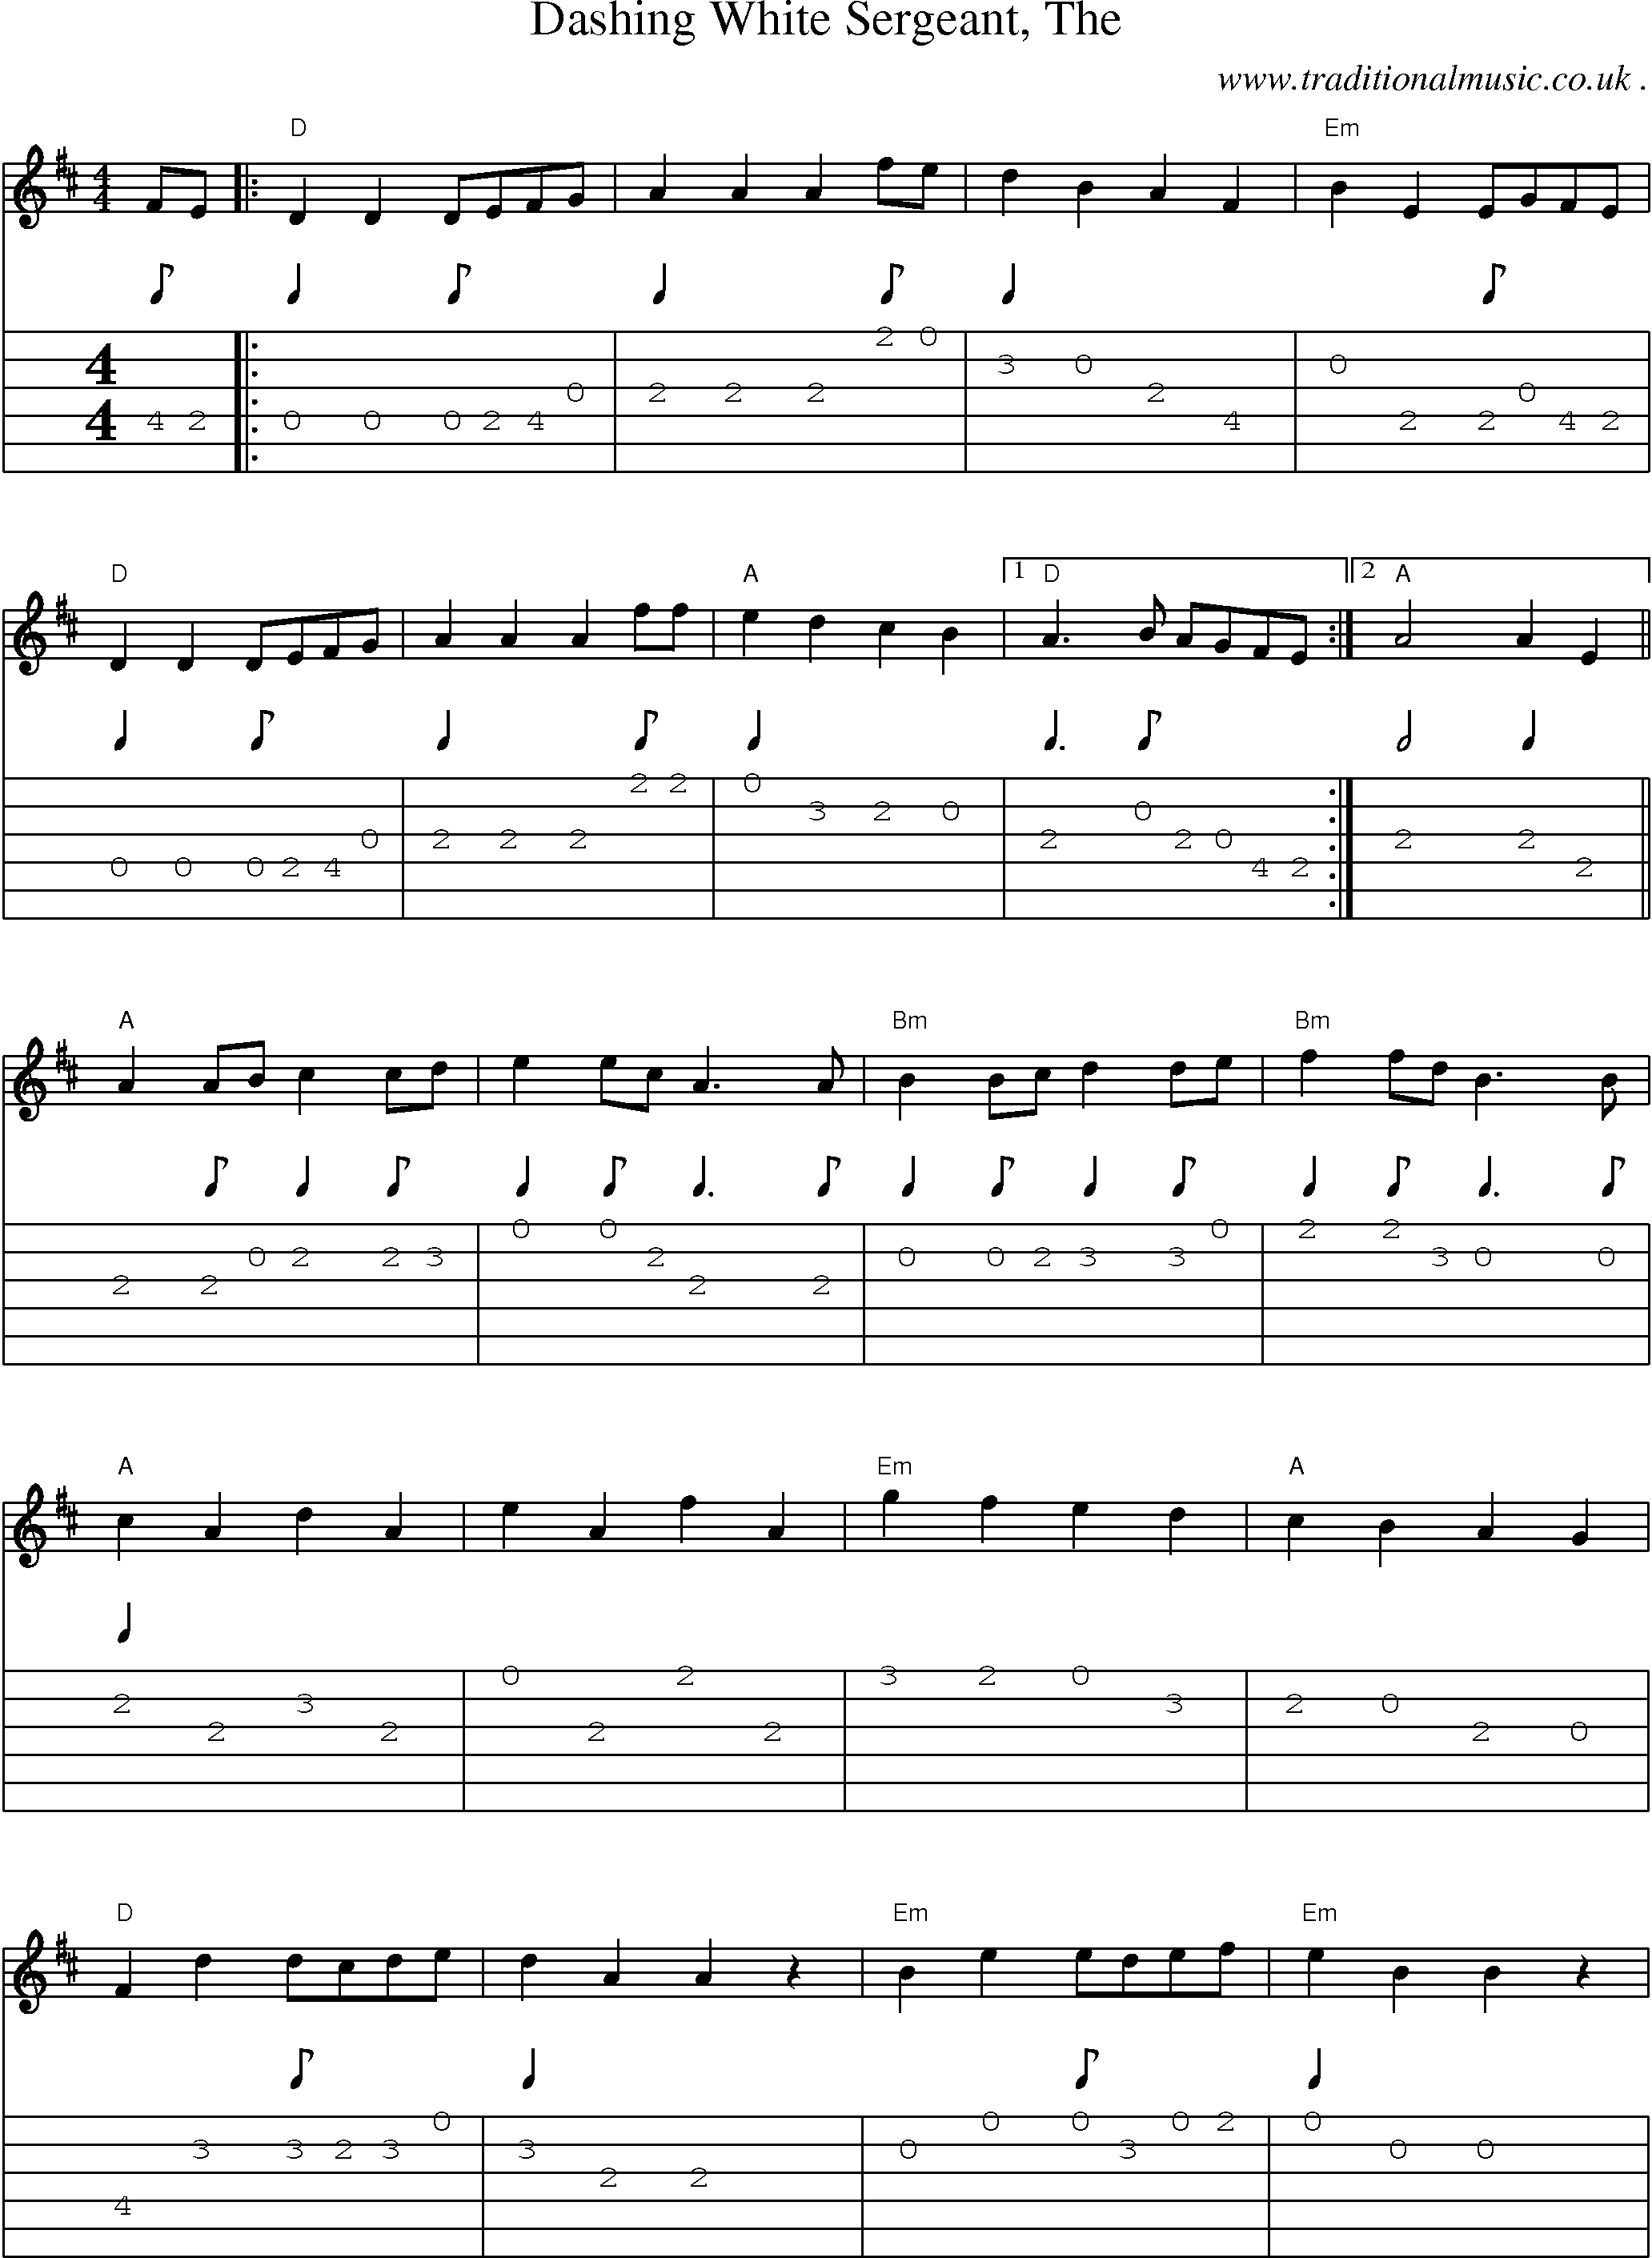 Music Score and Guitar Tabs for Dashing White Sergeant The